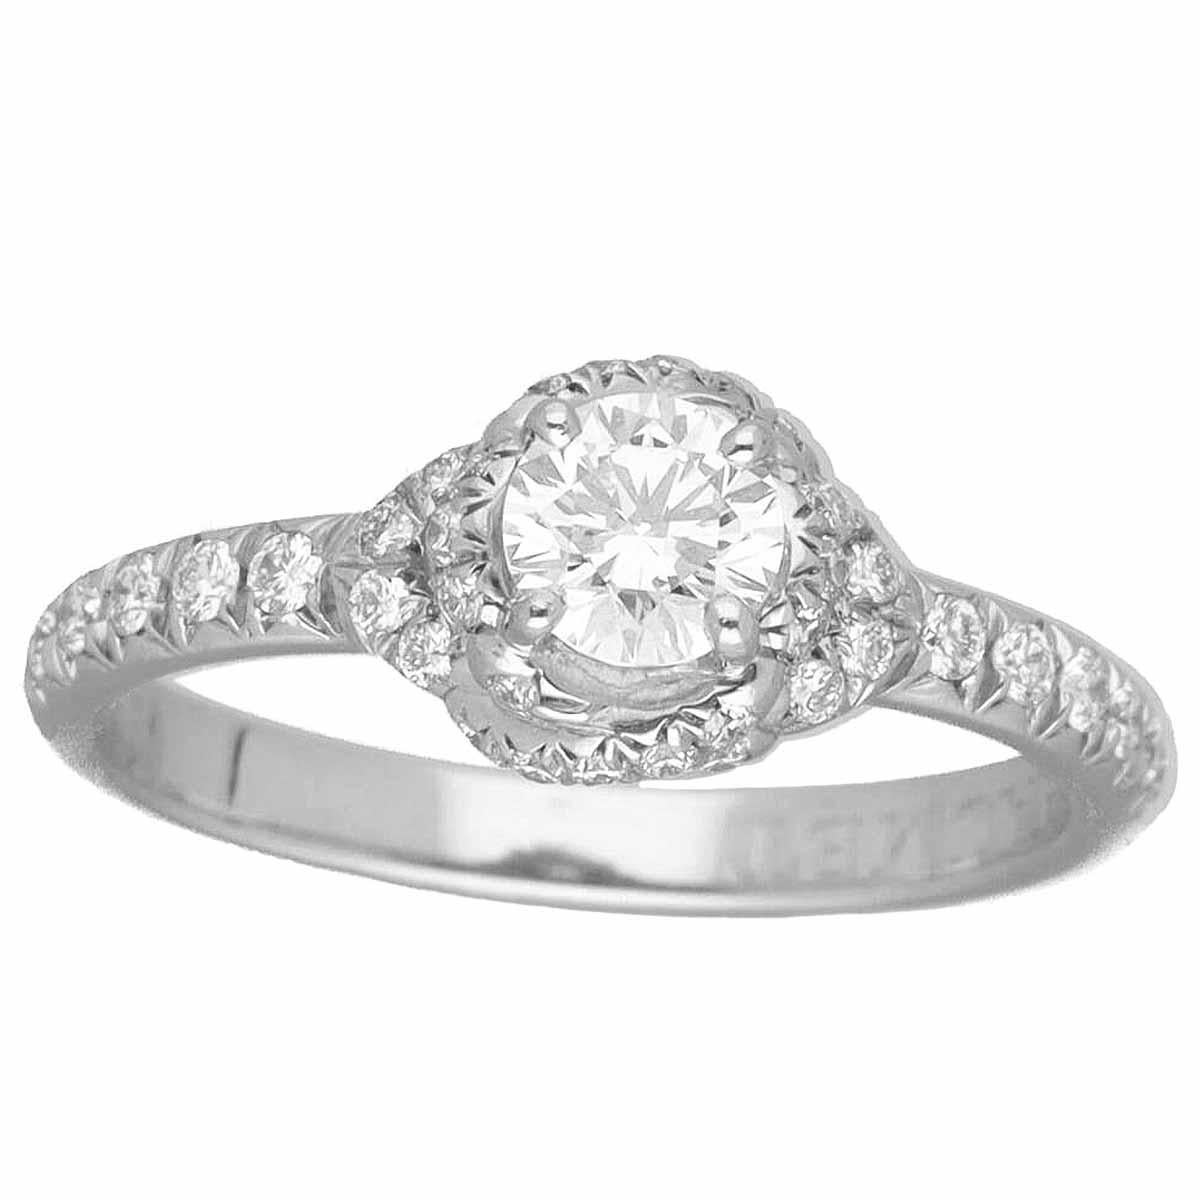 Brand:CHAUMET
Name:Liens d'Amour Solitaire Ring
Ref.:Ref.J3LCZZ
Material:1P diamond (D0.30ct D-VS1-3Ex),Side diamond, Pt950 platinum
Weight:3.5g（Approx)
Ring size: British & Australian:H 1/2  /   US & Canada:4 /  French & Russian:47 /  German:15 / 